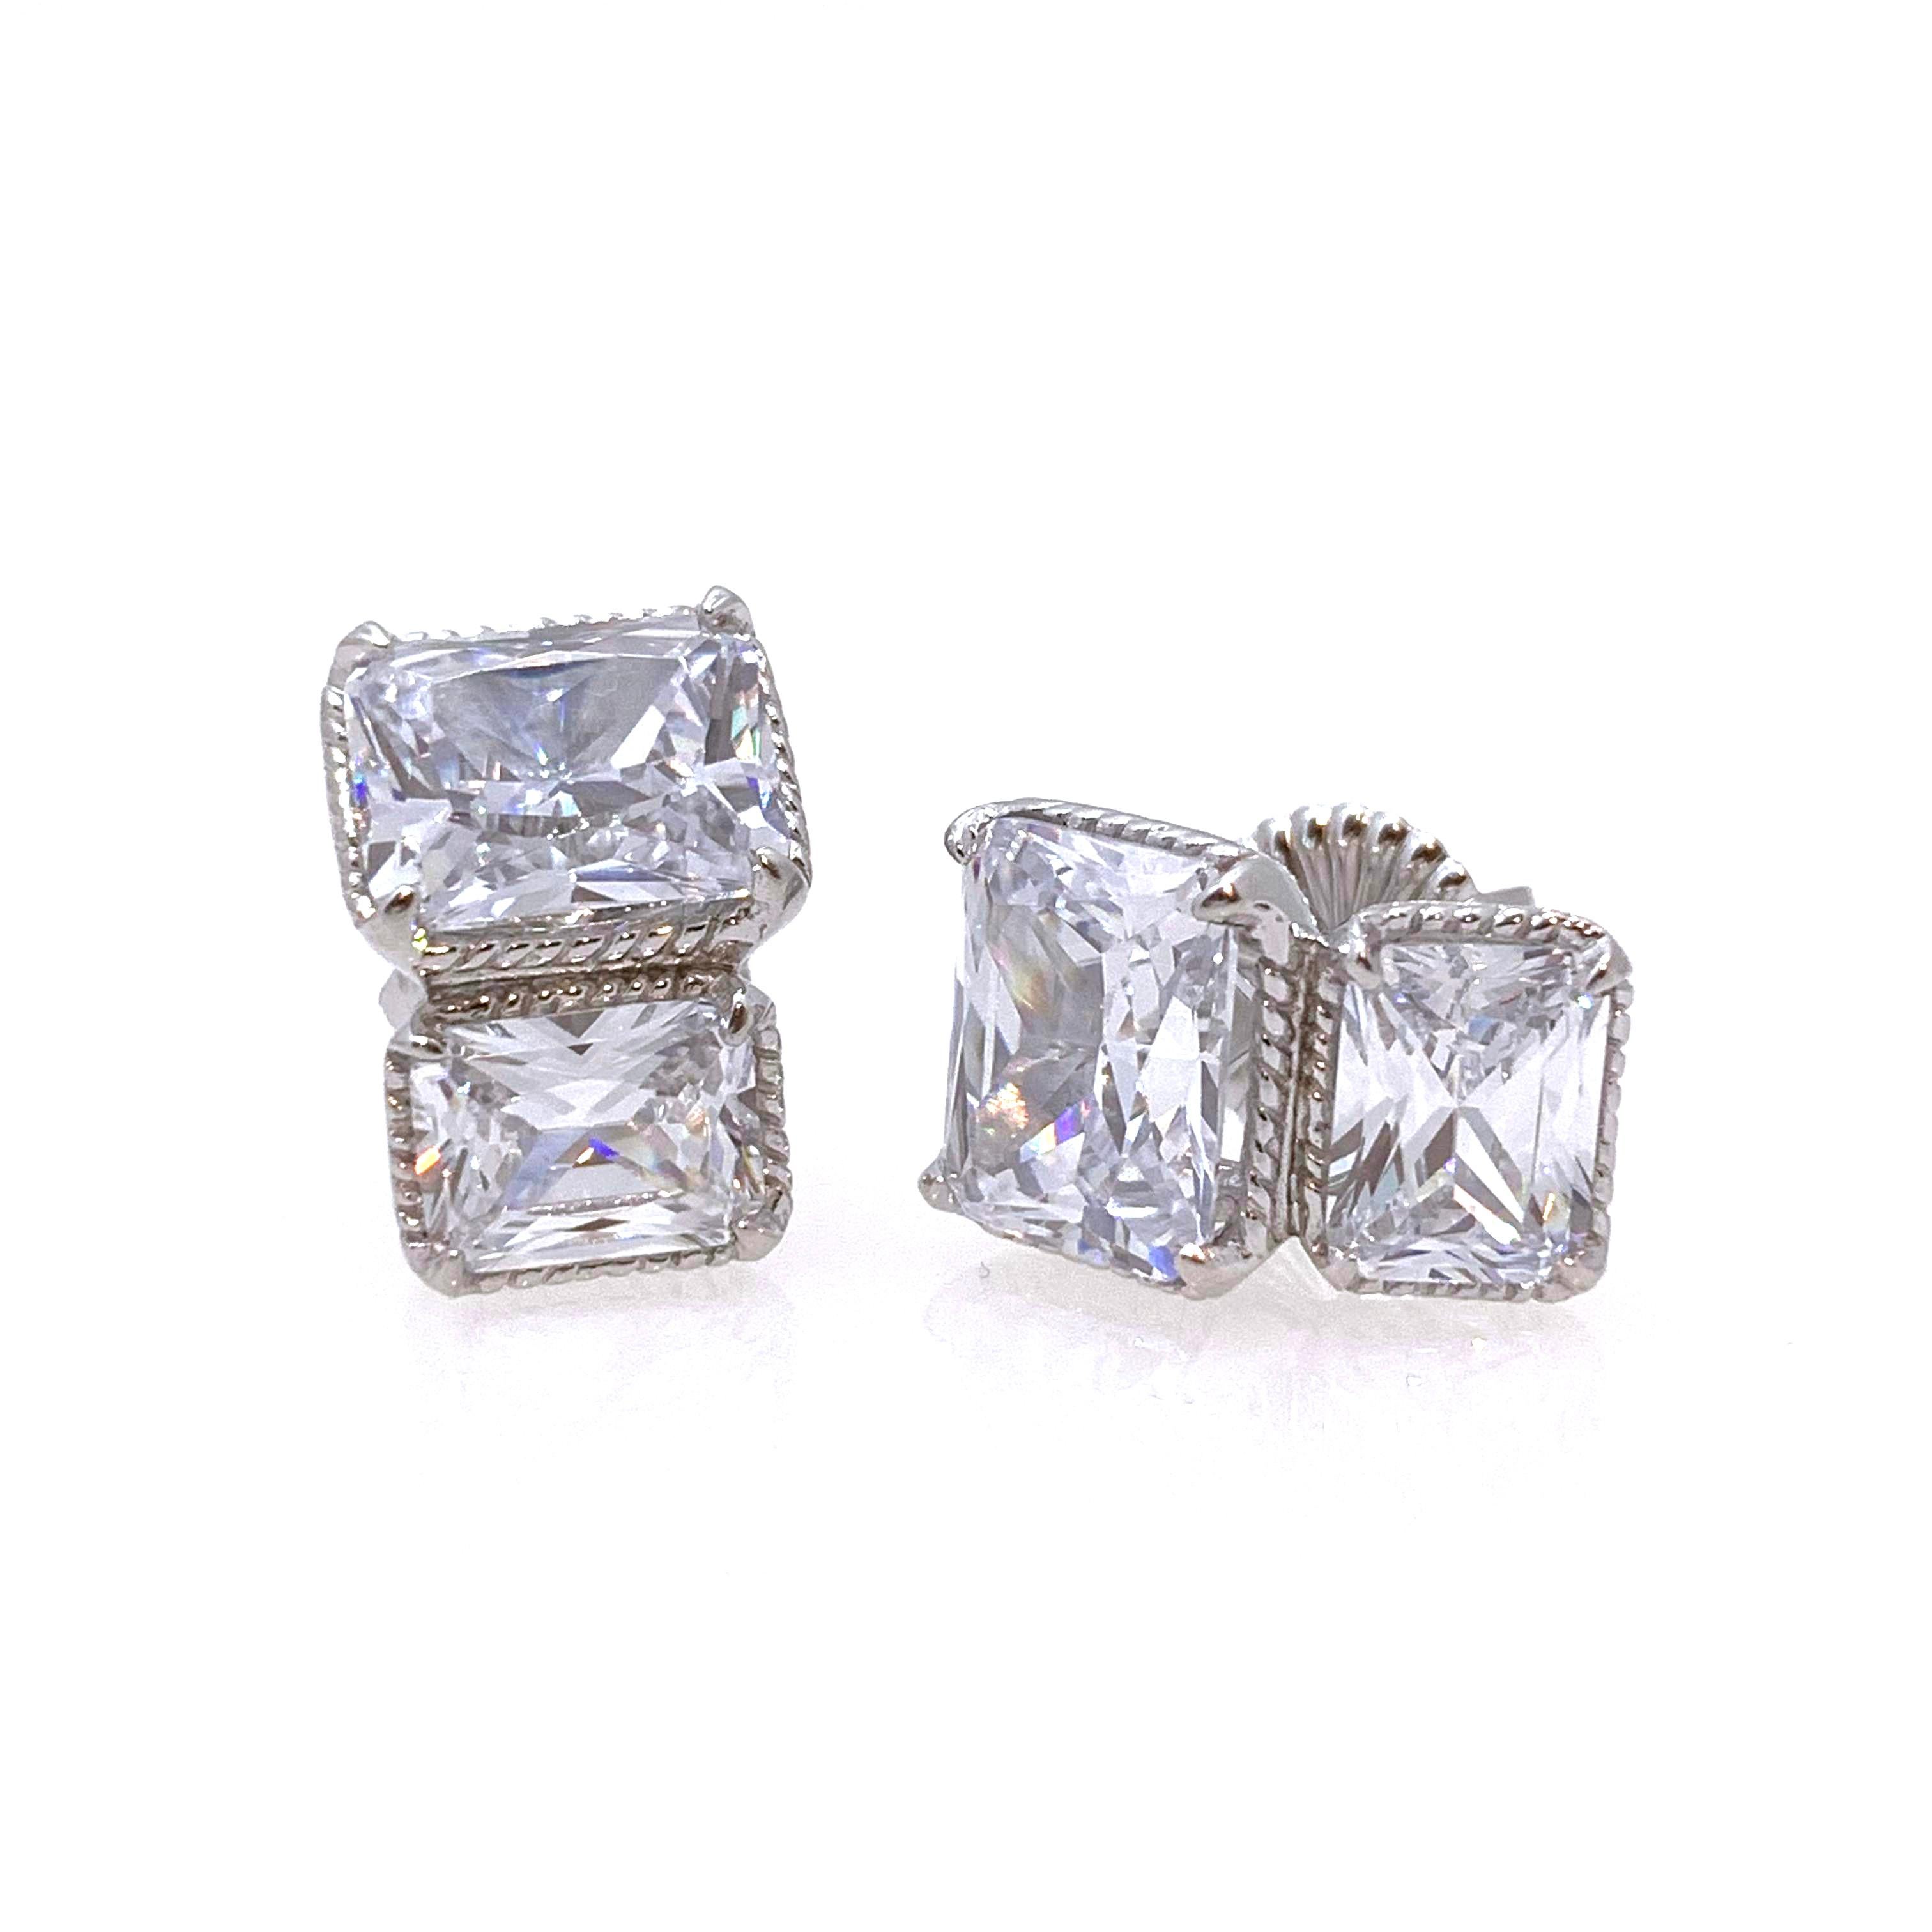 Stunning Double Radiant-cut Simulated Diamond Stud Sterling Silver Earrings

These elegant earrings feature four beautiful pieces of 3- and 2-carat radiant-cut simulated diamond cz (10 carat size total) handset in platinum rhodium plated sterling